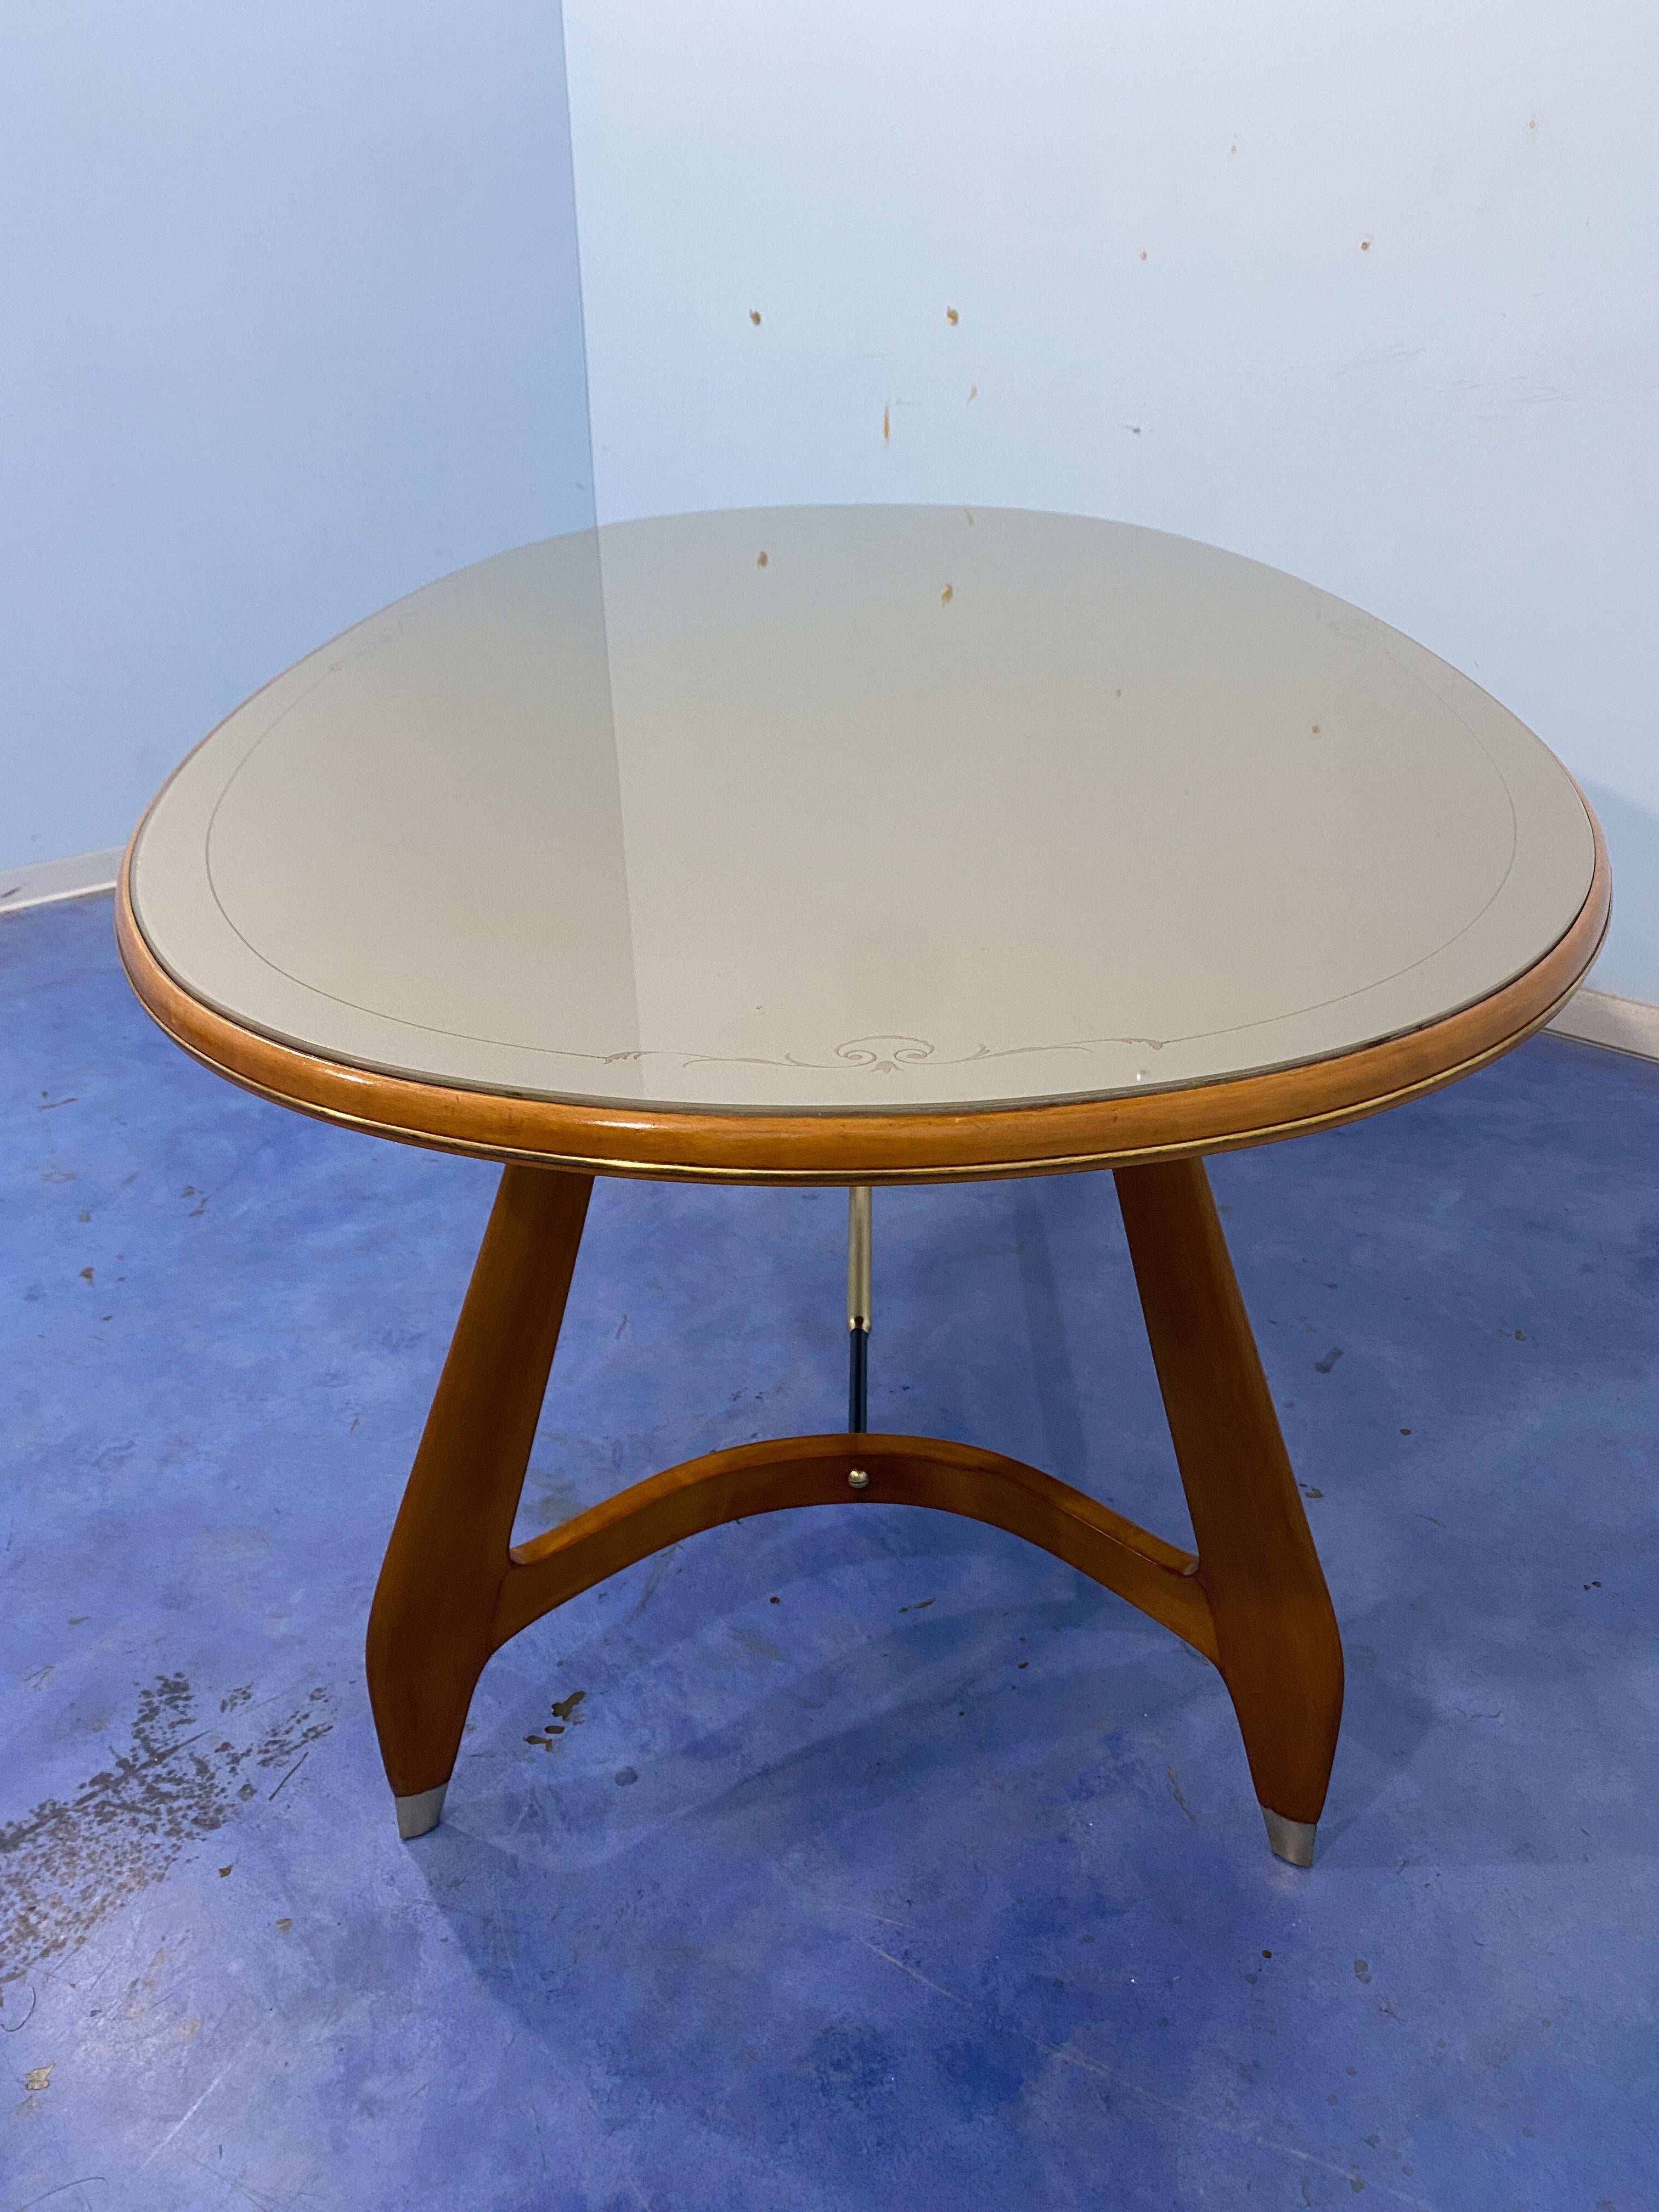 Italian Midcentury Green Olive Dining Table by Vittorio Dassi, 1950s For Sale 3